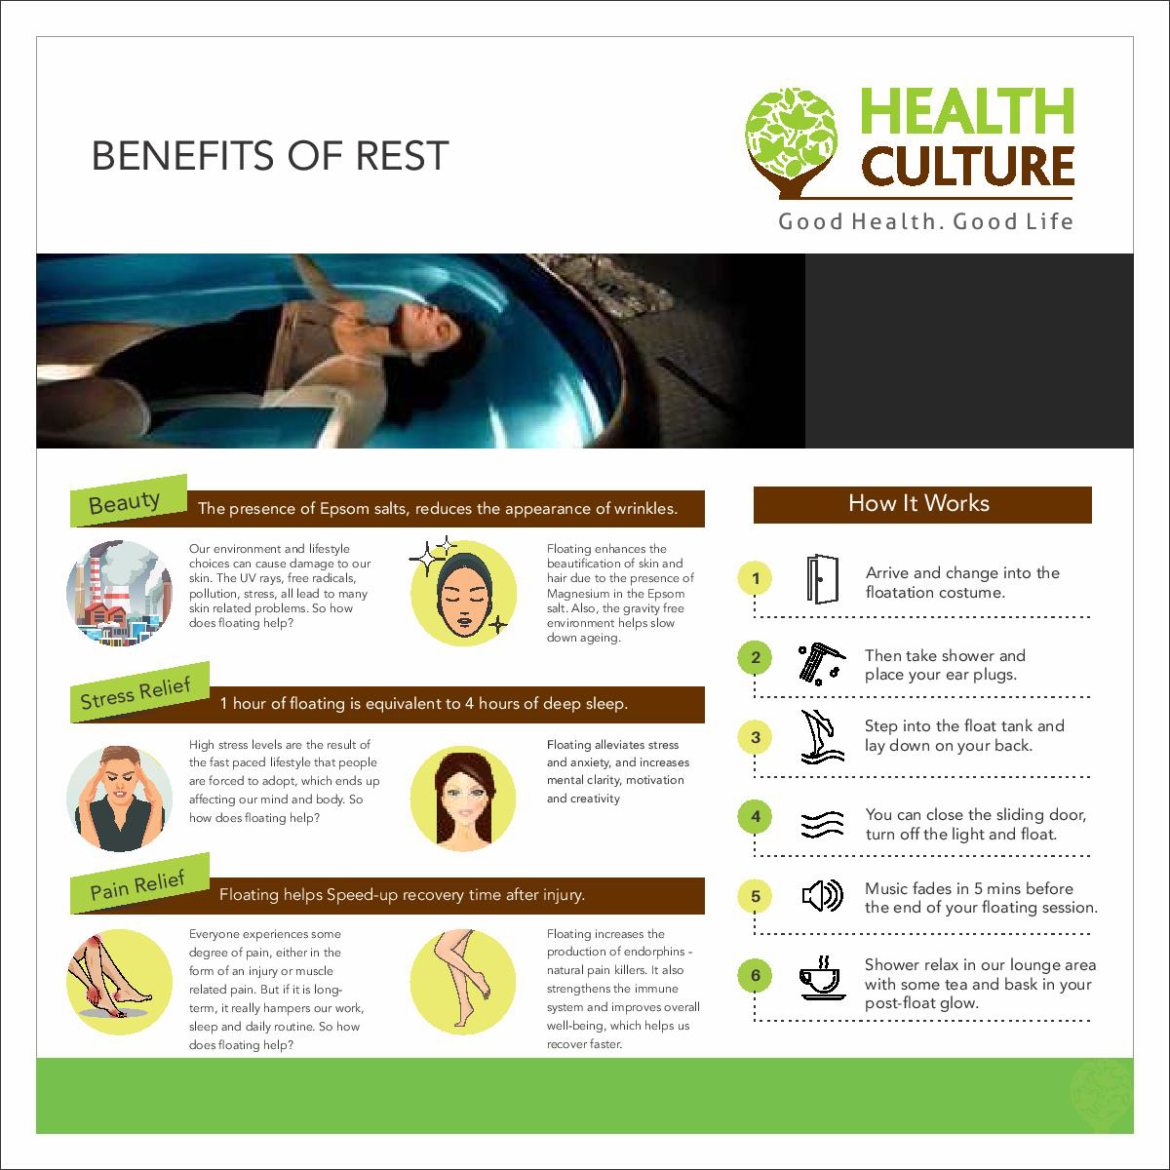 Benefits of REST Article - Health Culture